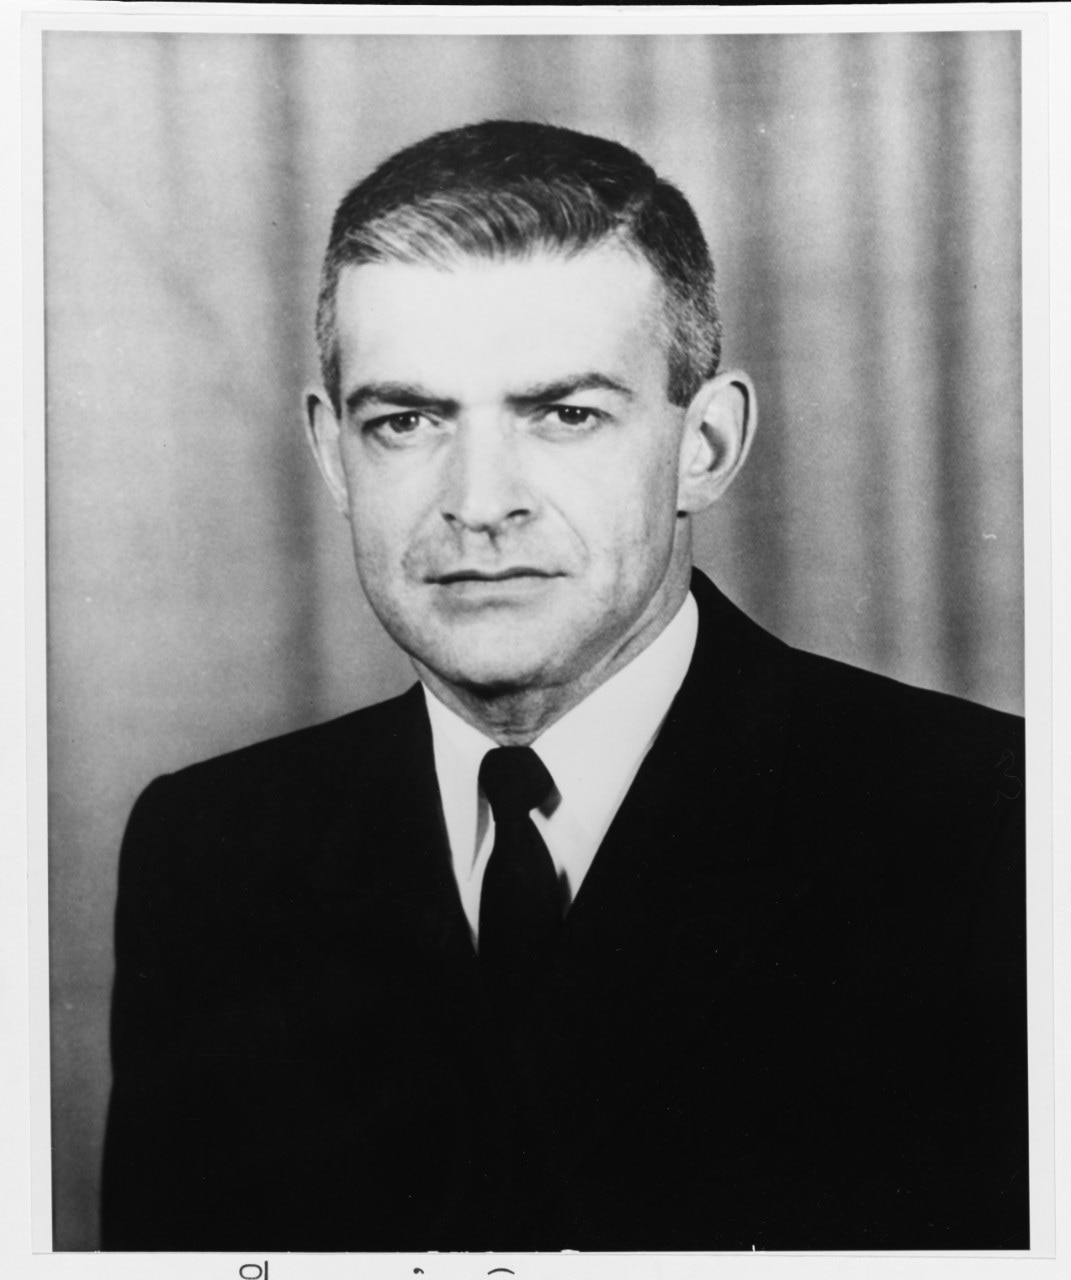 A headshot of a man in suit and tie.